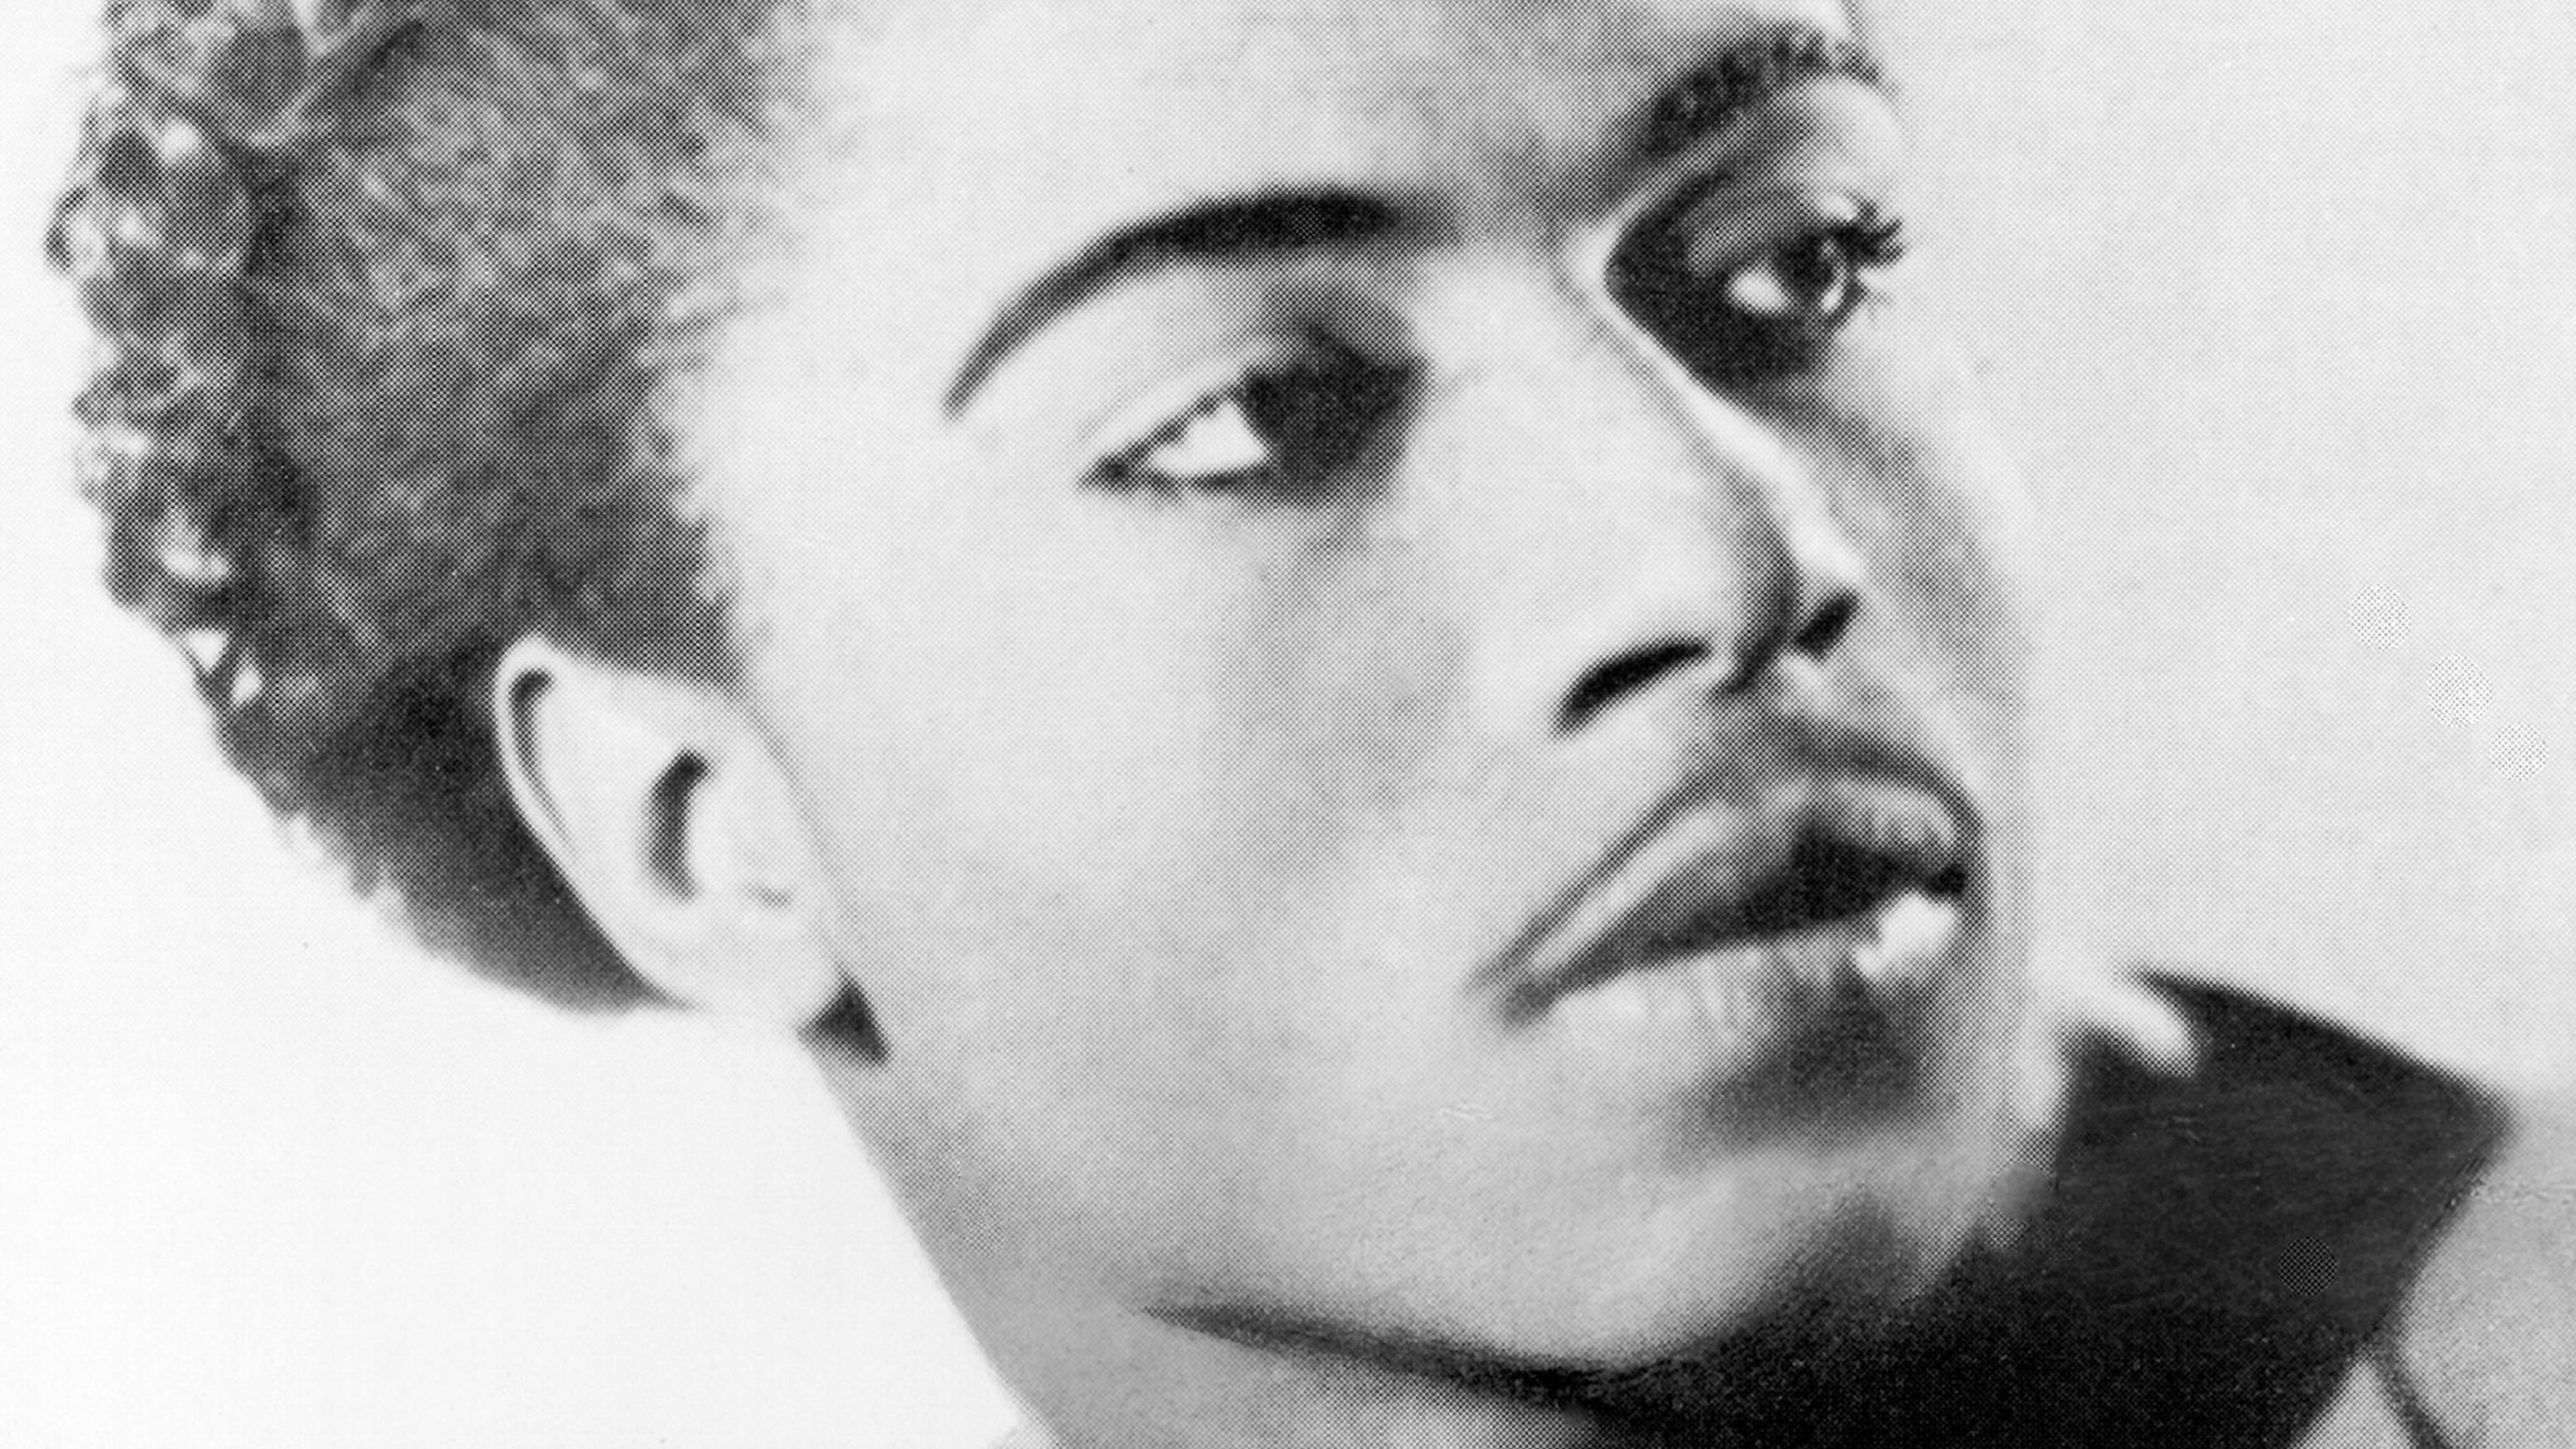 An early portrait shows Little Richard around 1952 in Atlanta. Richard Wayne Penniman was born on December 5, 1932, in Macon, Georgia. The third of 12 children, he clashed with his moonshine-selling father and was ordered out of the family home as a teenager. A White family named Johnson took him in, and Penniman — who had honed his musical ability in church — started performing in their club. Depending on the story, he was called "Little Richard" either as a childhood nickname or because he was underage.